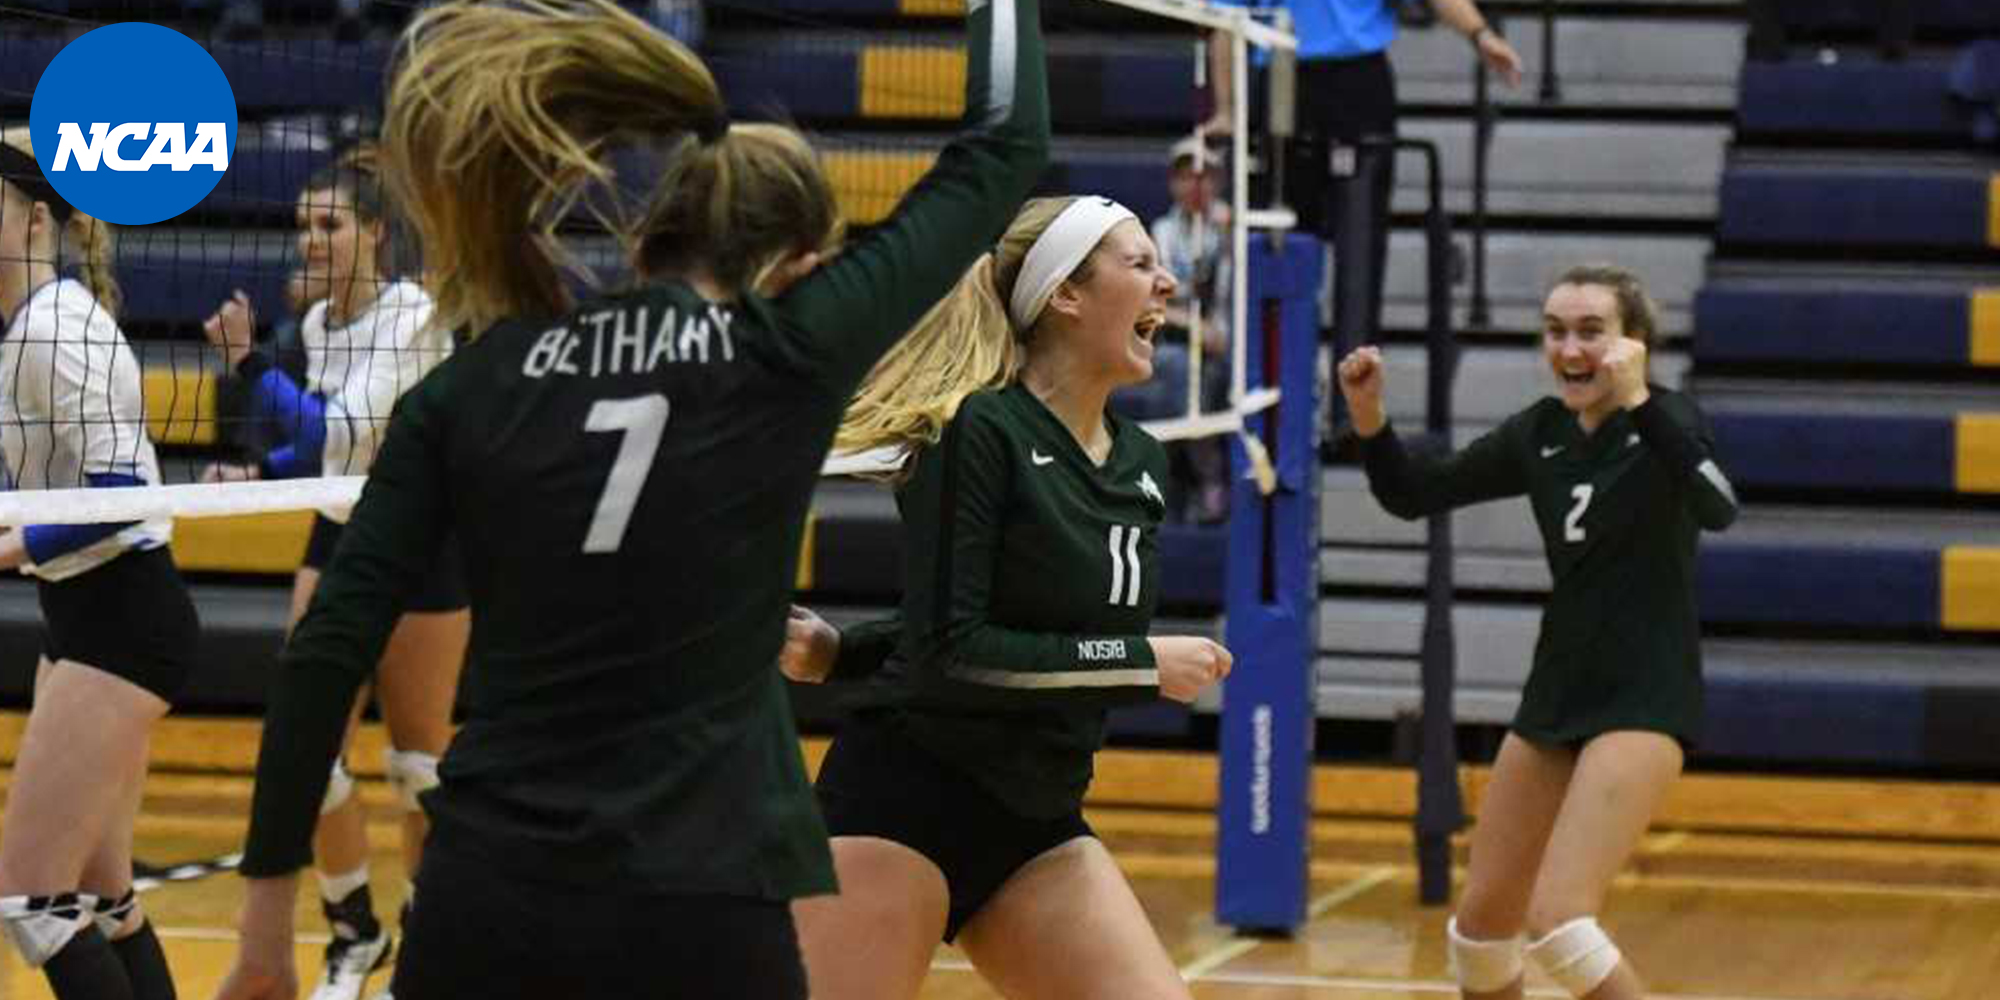 Bethany Falls, 3-1, in Opening Round of NCAA to Christopher Newport